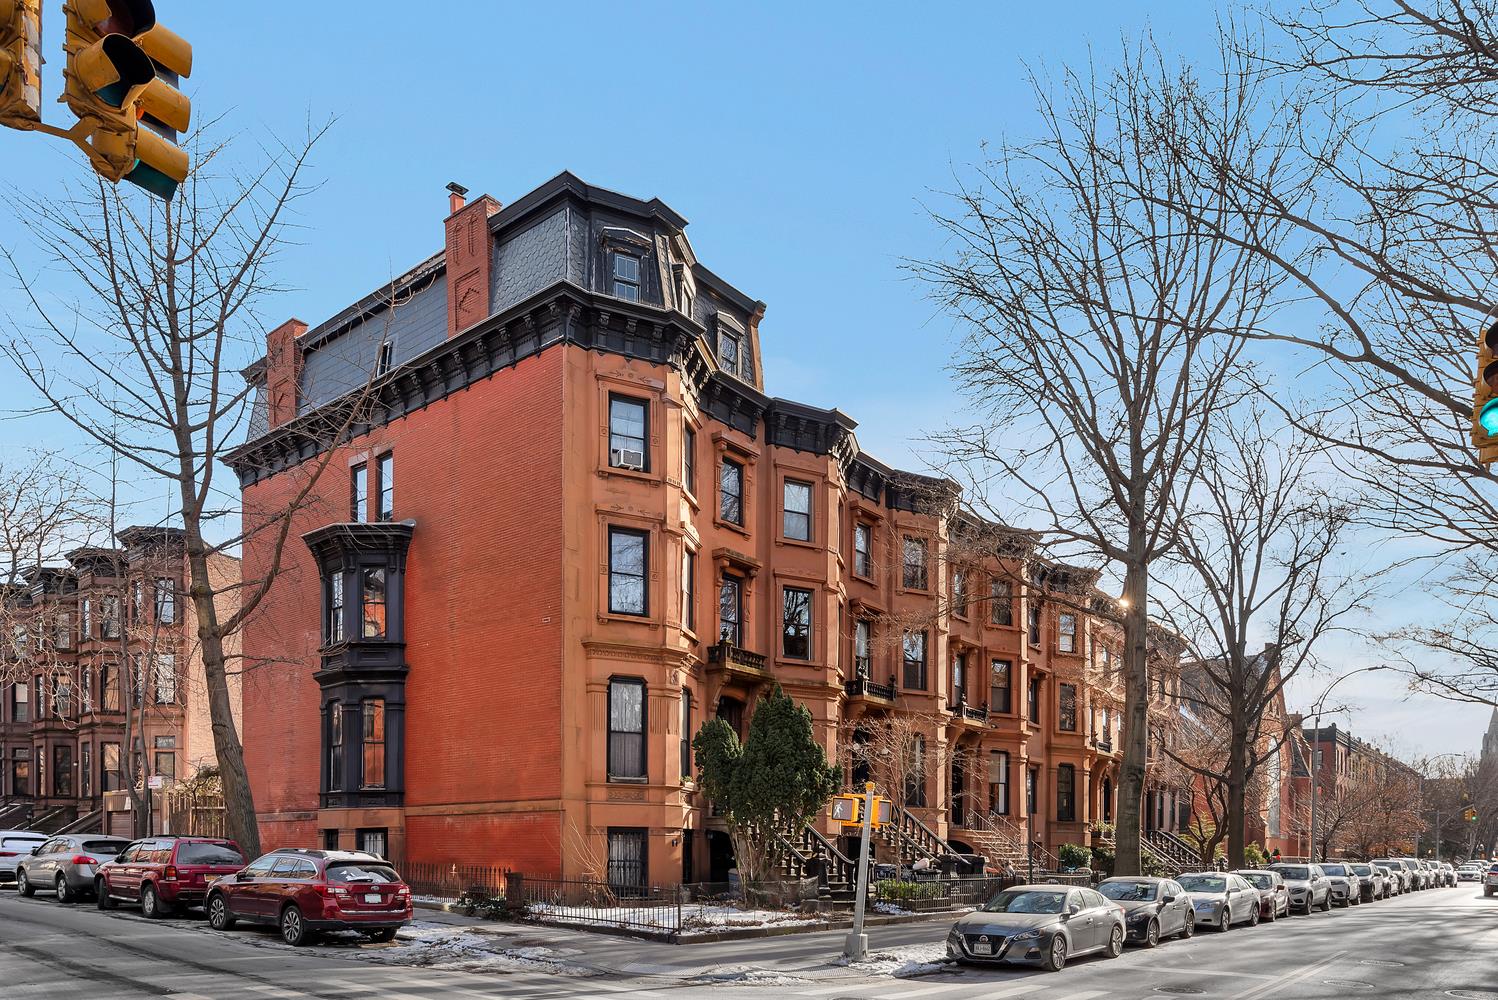 Park Slope, Brooklyn, NY Real Estate & Homes for Sale